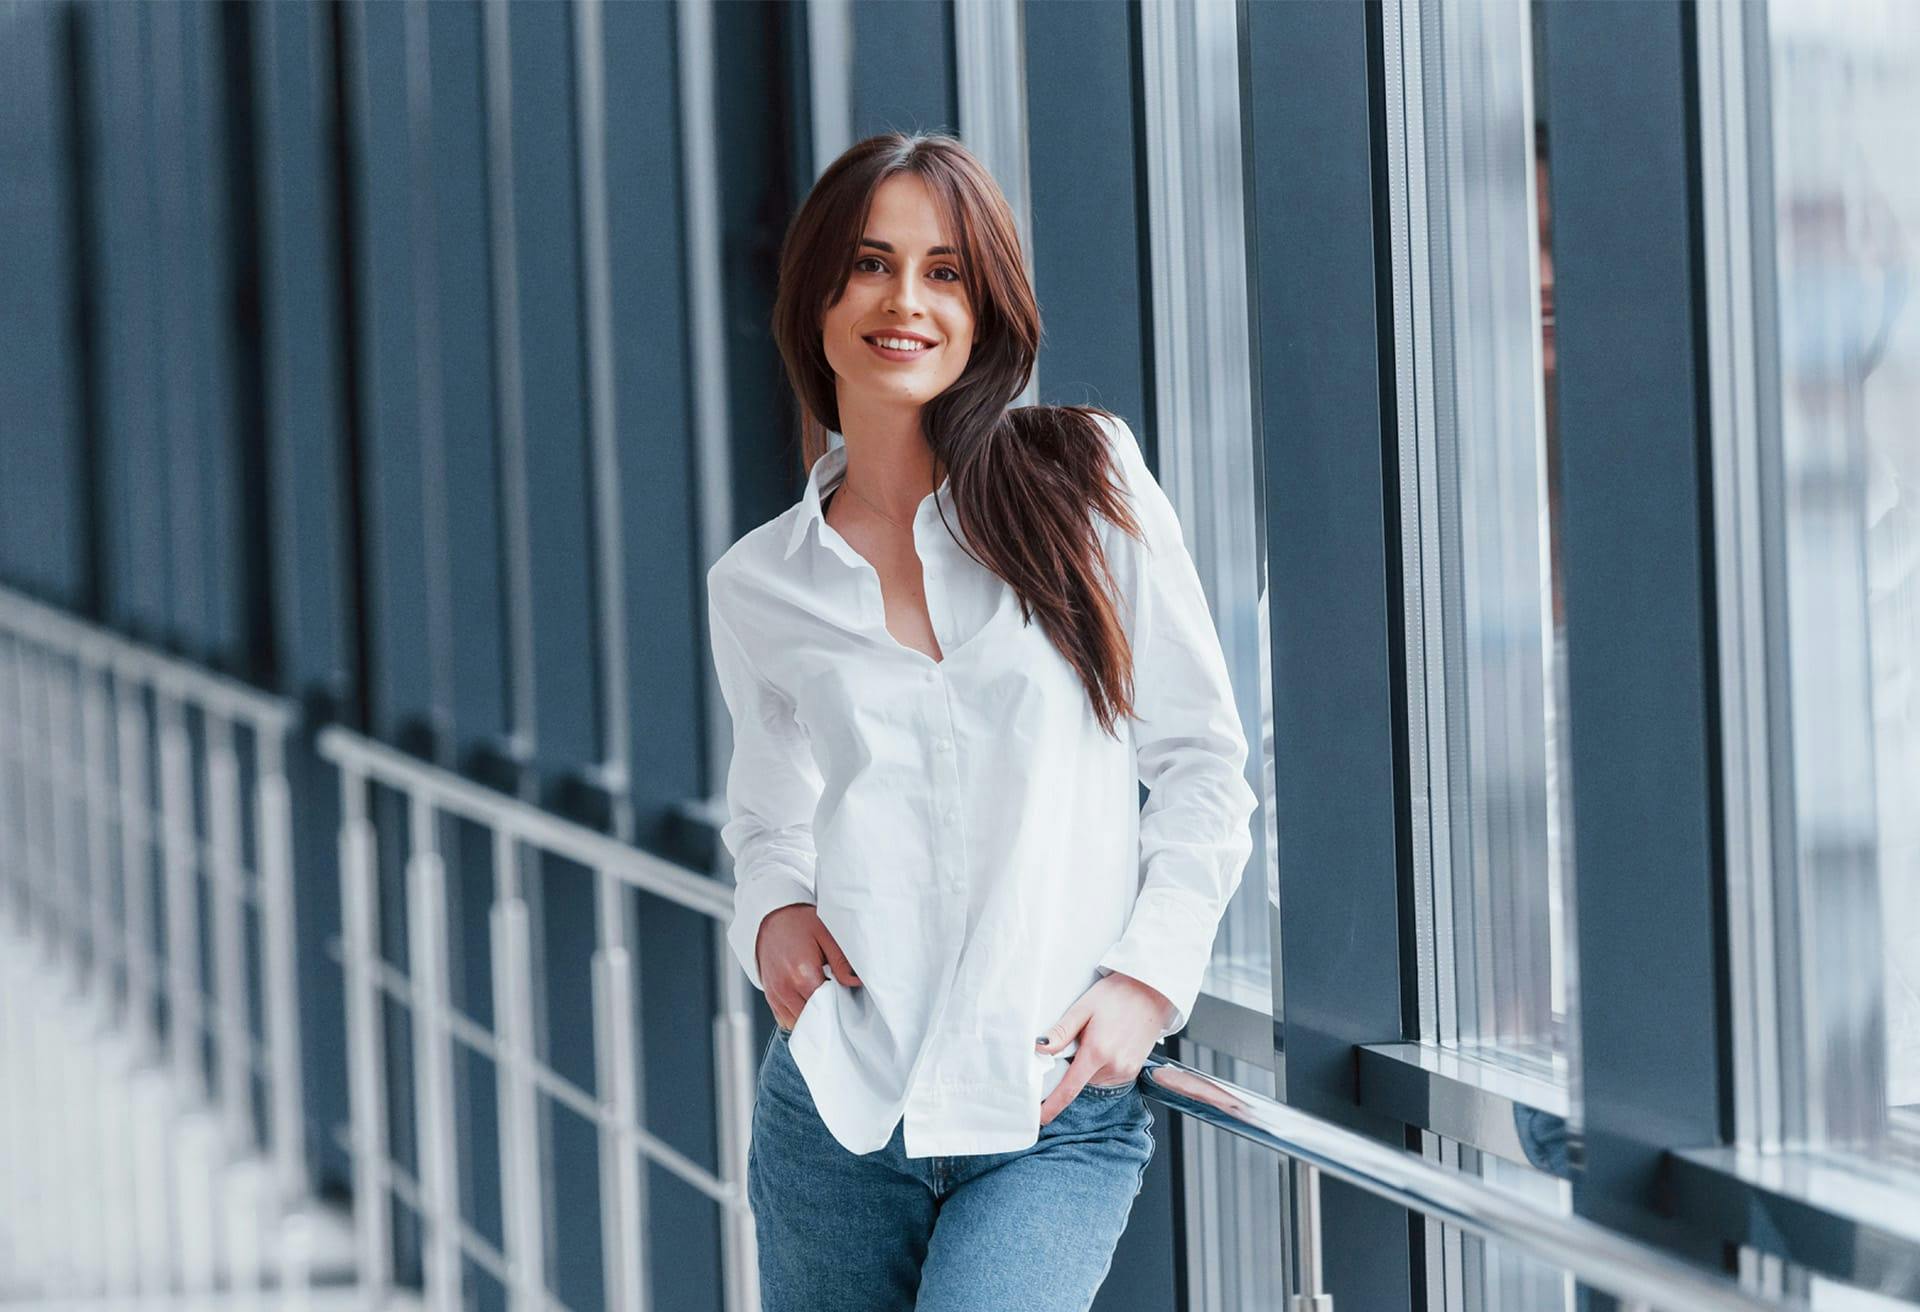 brunette woman standing in a hallway in a white button down and blue jeans